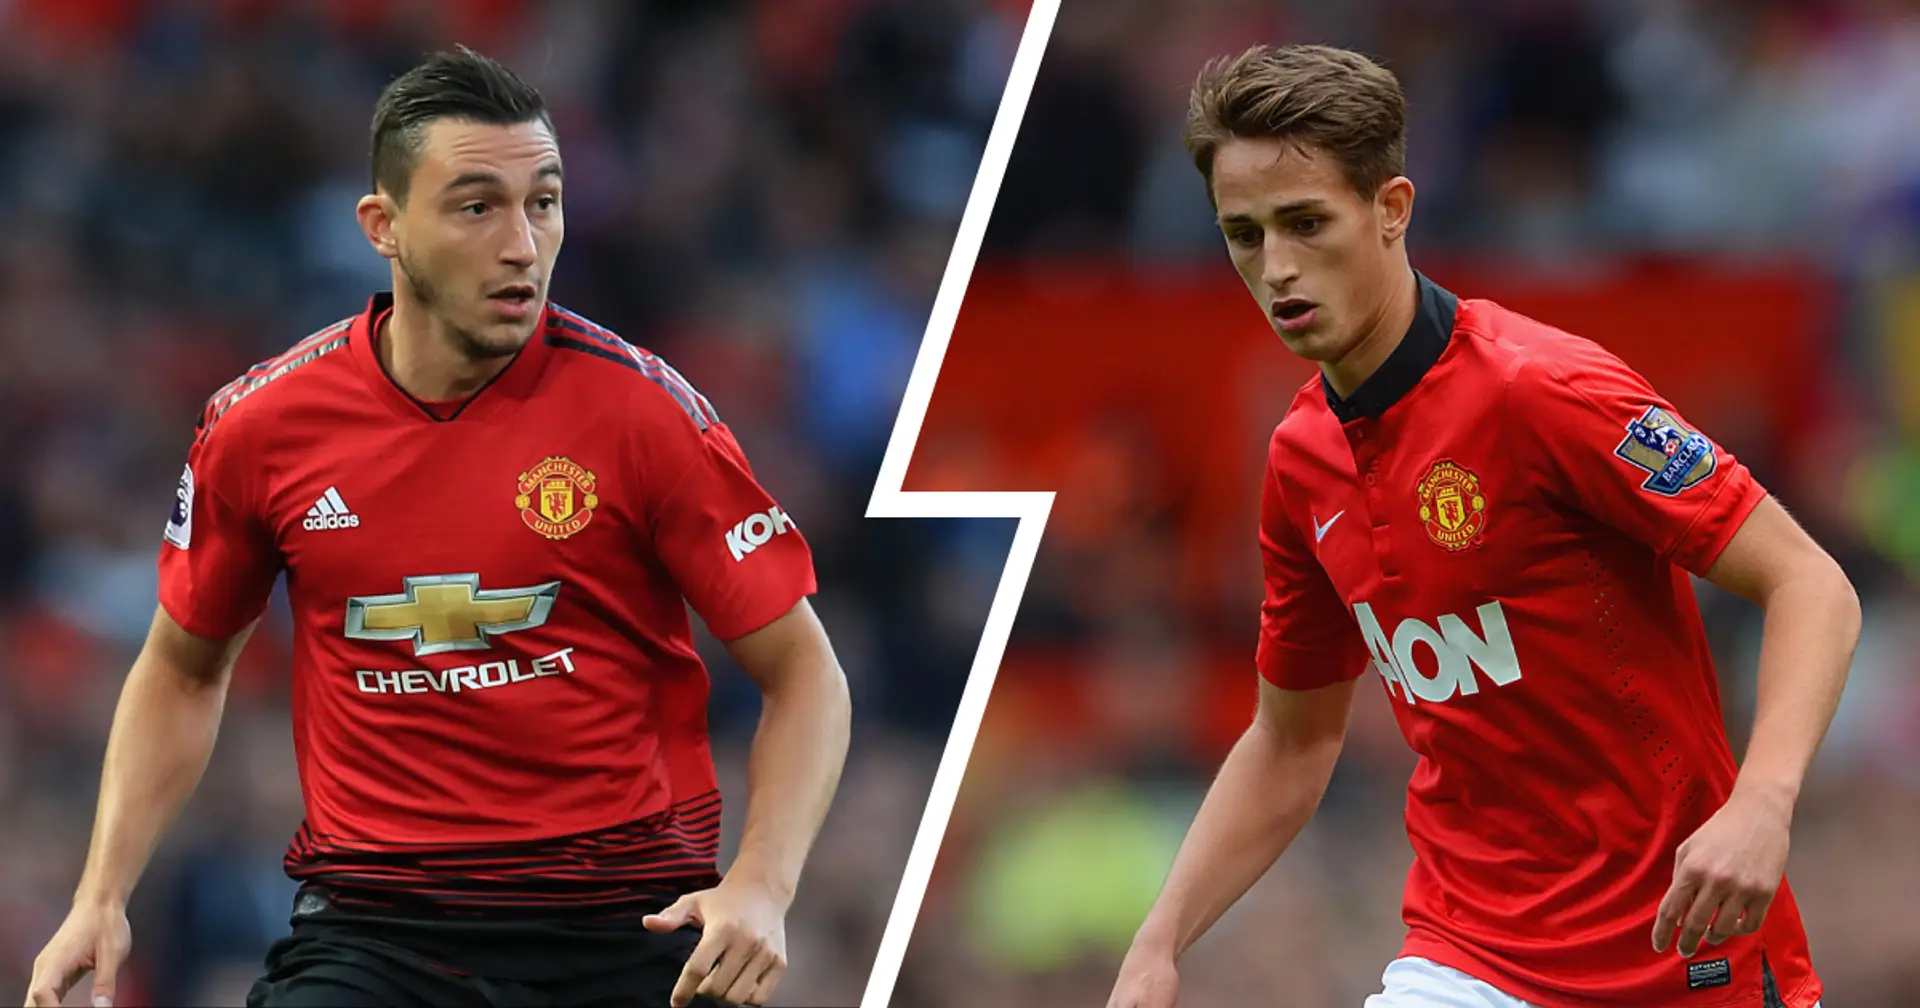 'Darmian, McNair and Januzaj could still be playing: Man United fans' prediction from 5 years ago goes hilariously wrong 